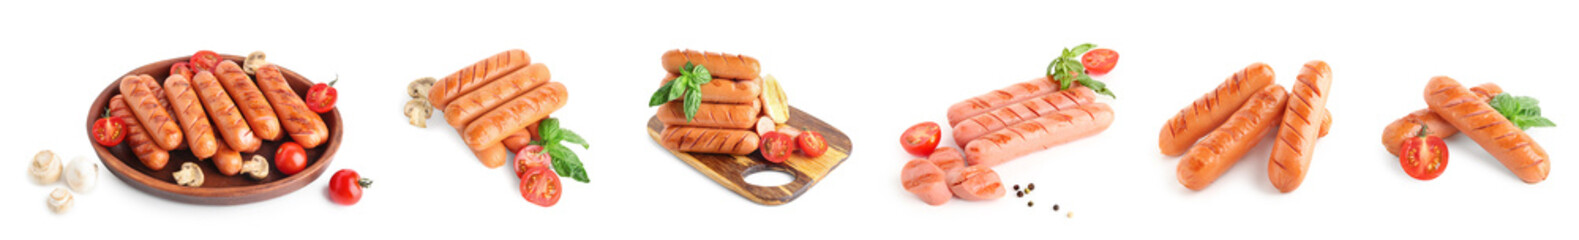 Collage of grilled sausages isolated on white background